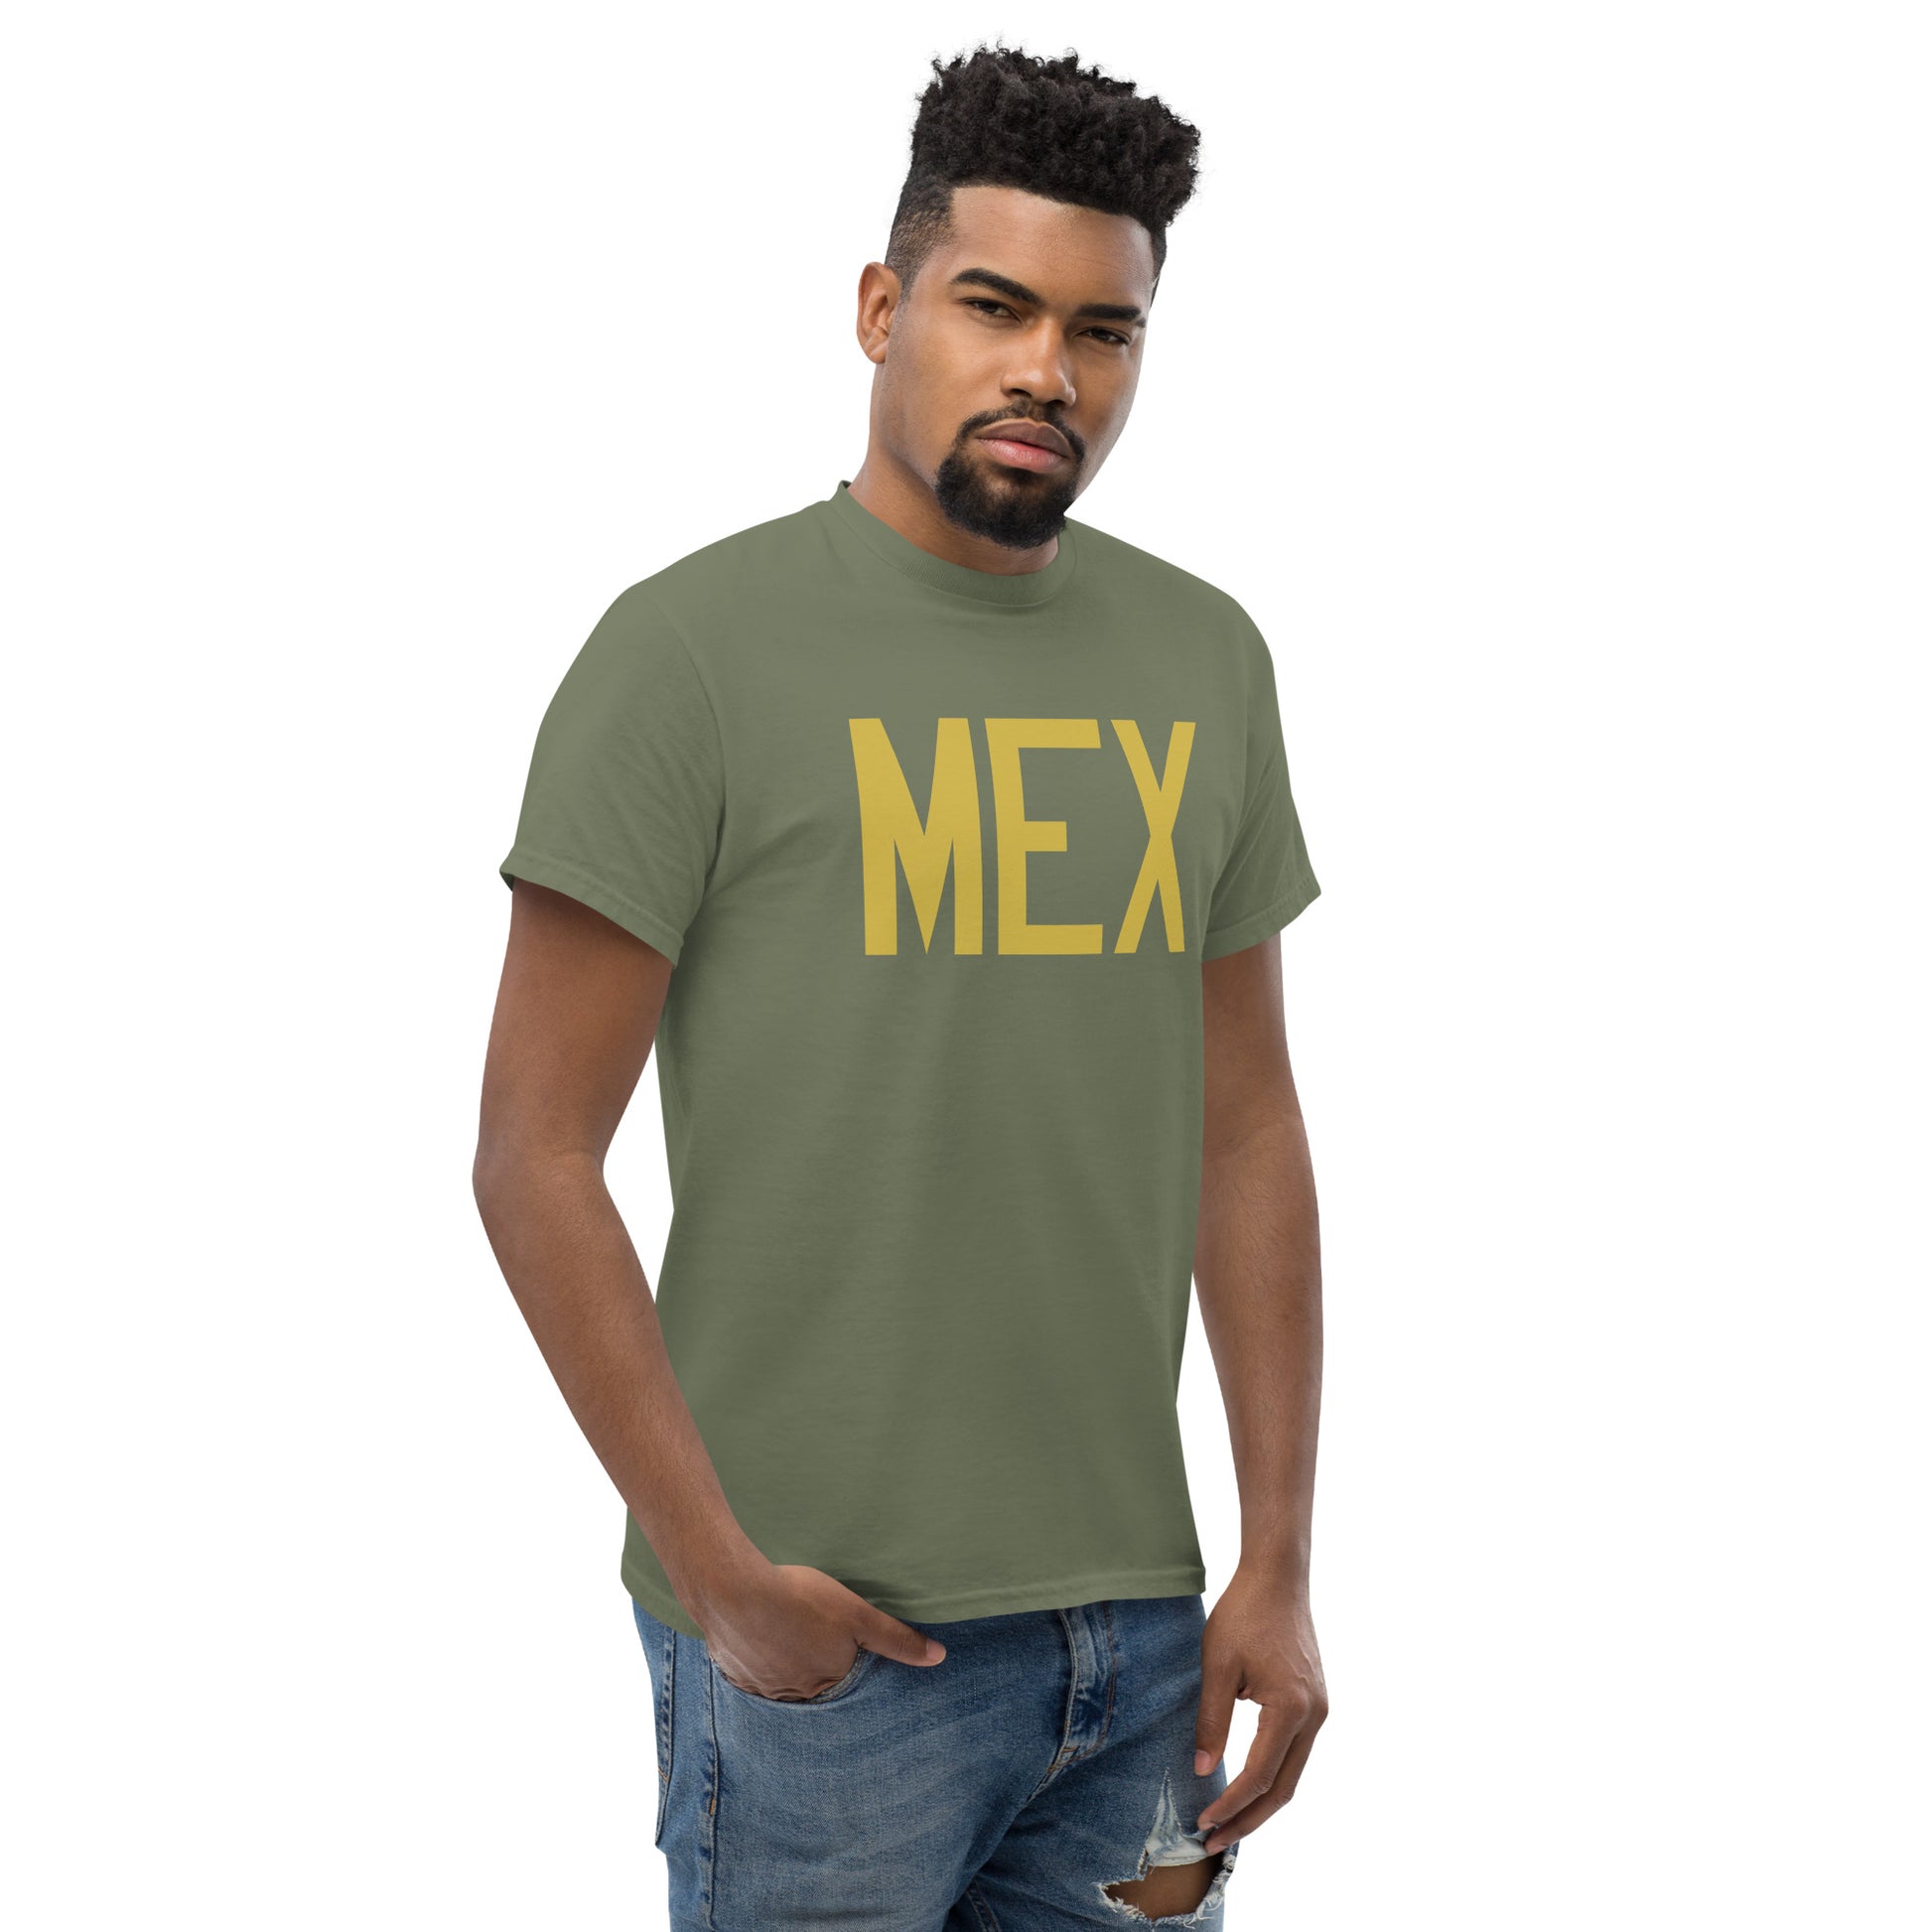 Aviation Enthusiast Men's Tee - Old Gold Graphic • MEX Mexico City • YHM Designs - Image 08